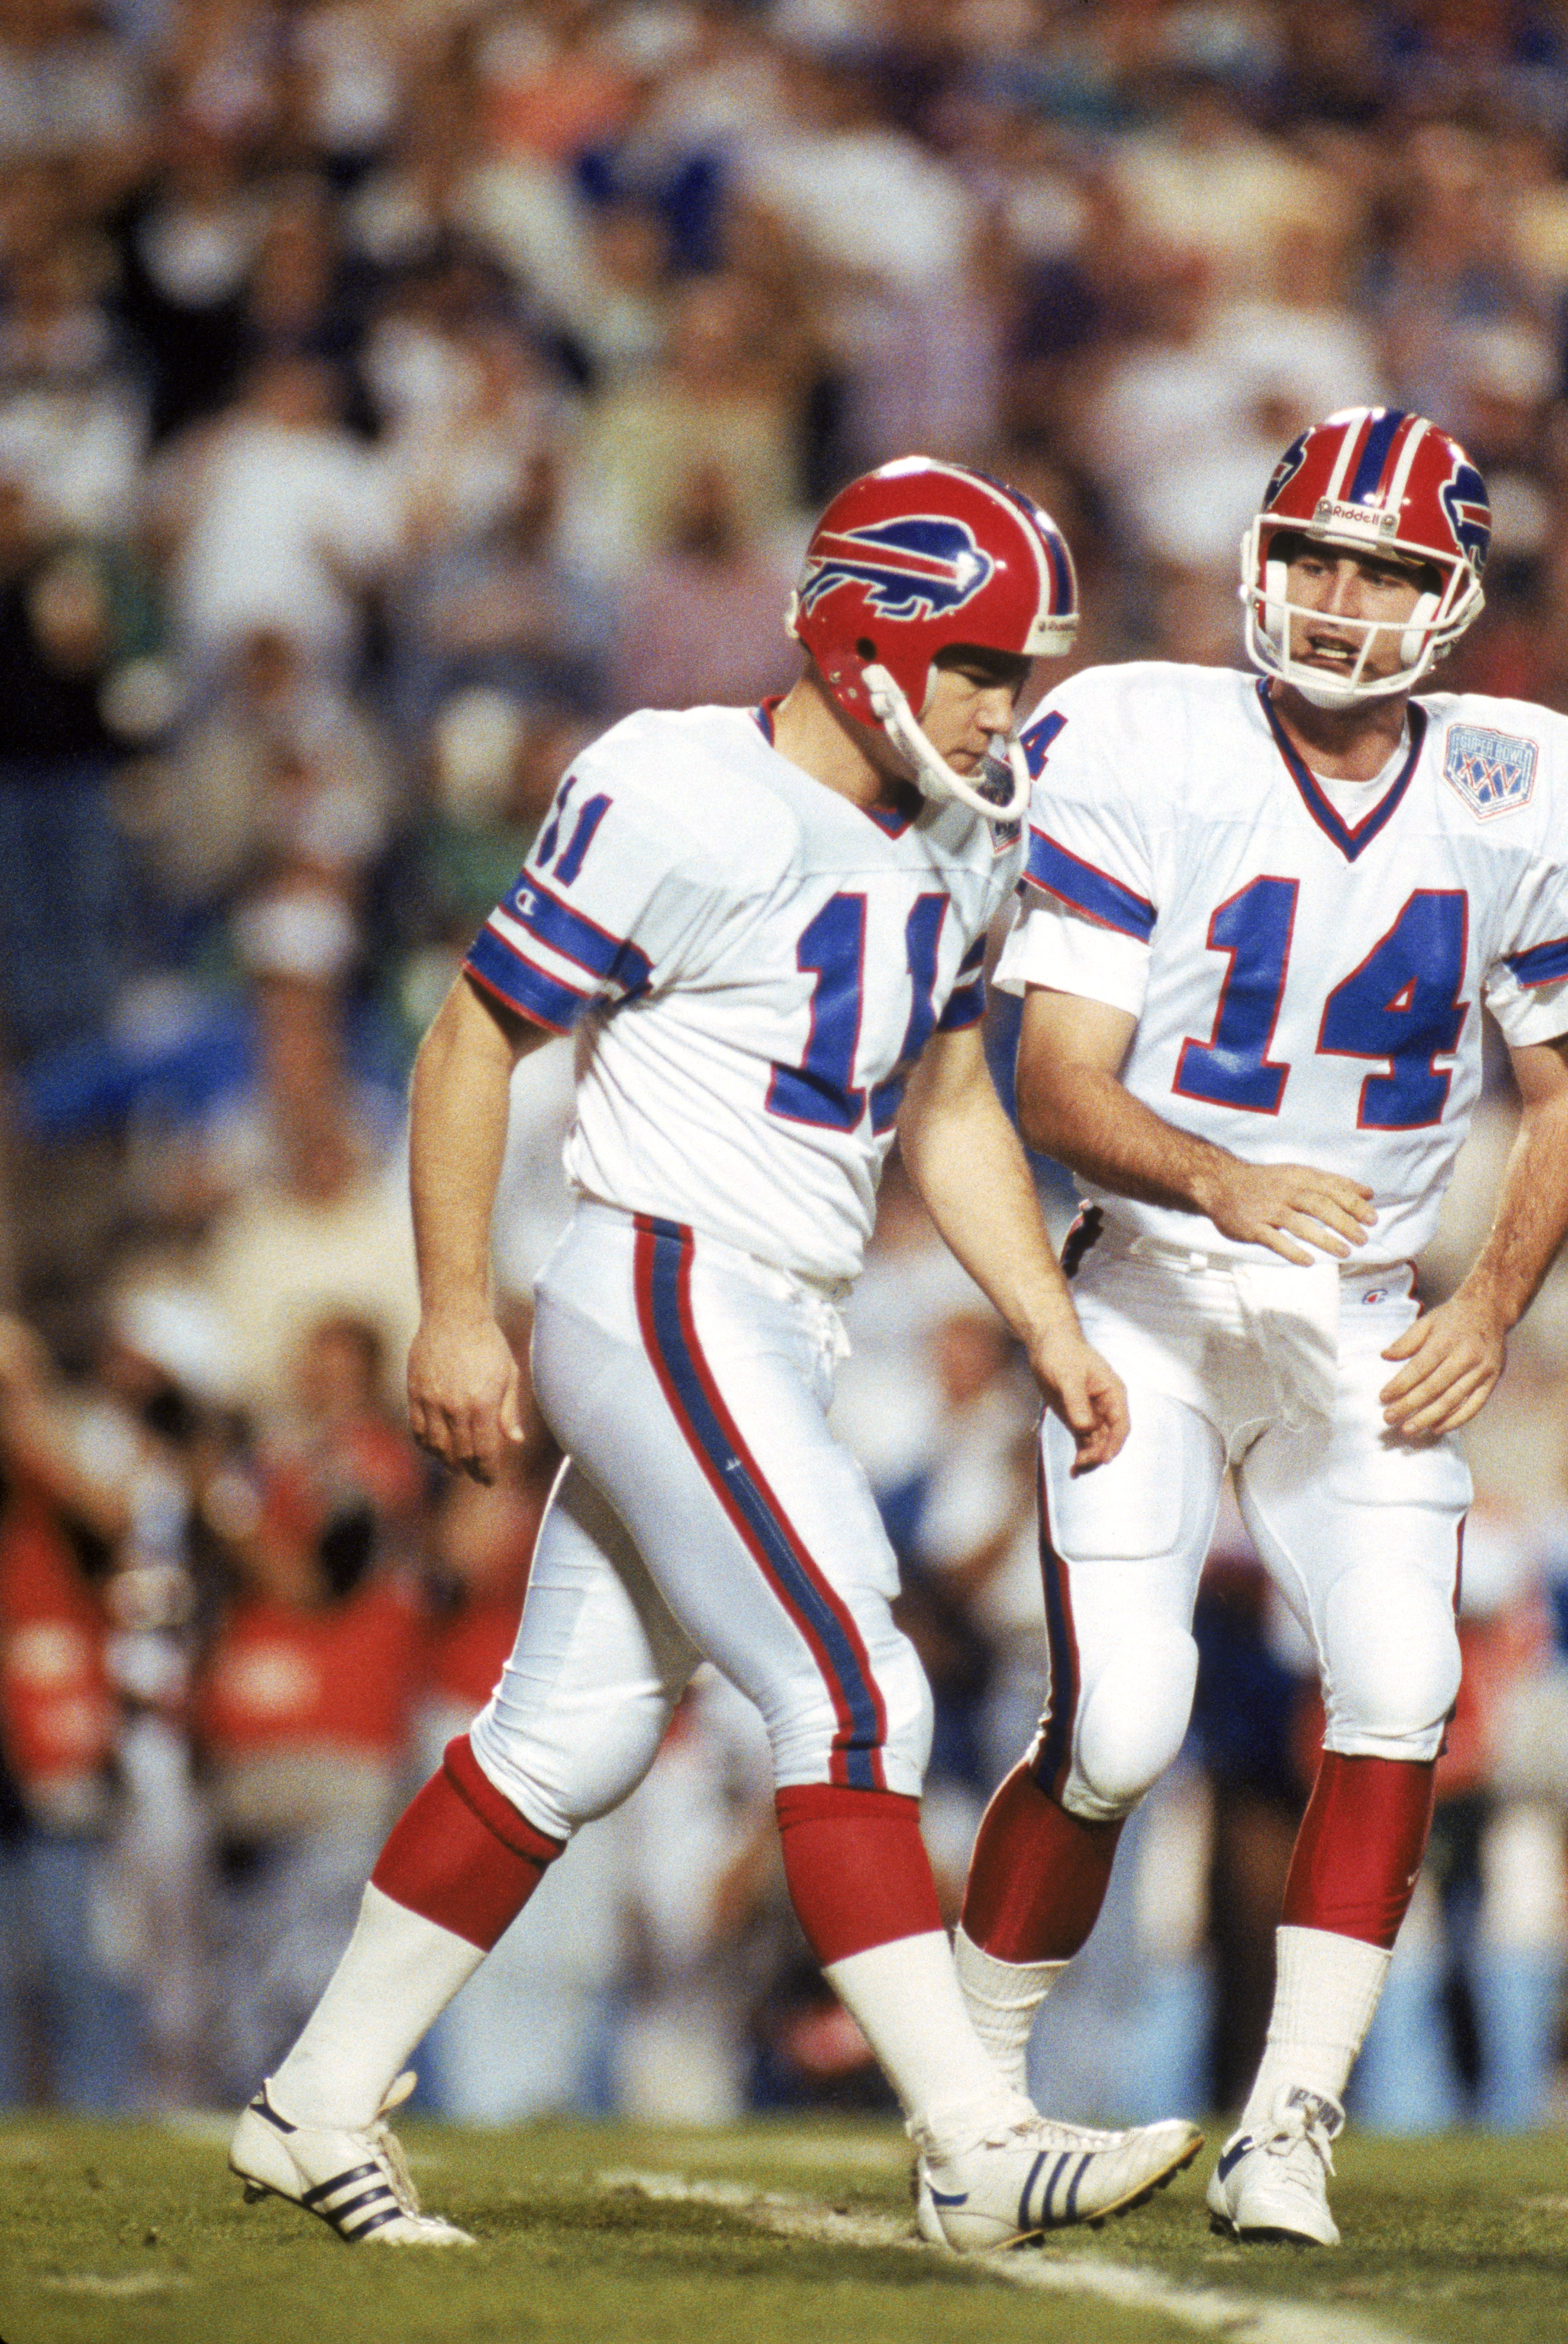 TAMPA, FL - JANUARY 27:  Kicker Scott Norwood #11 and  quarterback Frank Reich #14 of the Buffalo Bills walk n the field during Super Bowl XXV against the New York Giants at Tampa Stadium on January 27, 1991 in Tampa, Florida.  The Giants won 20-19.  (Pho